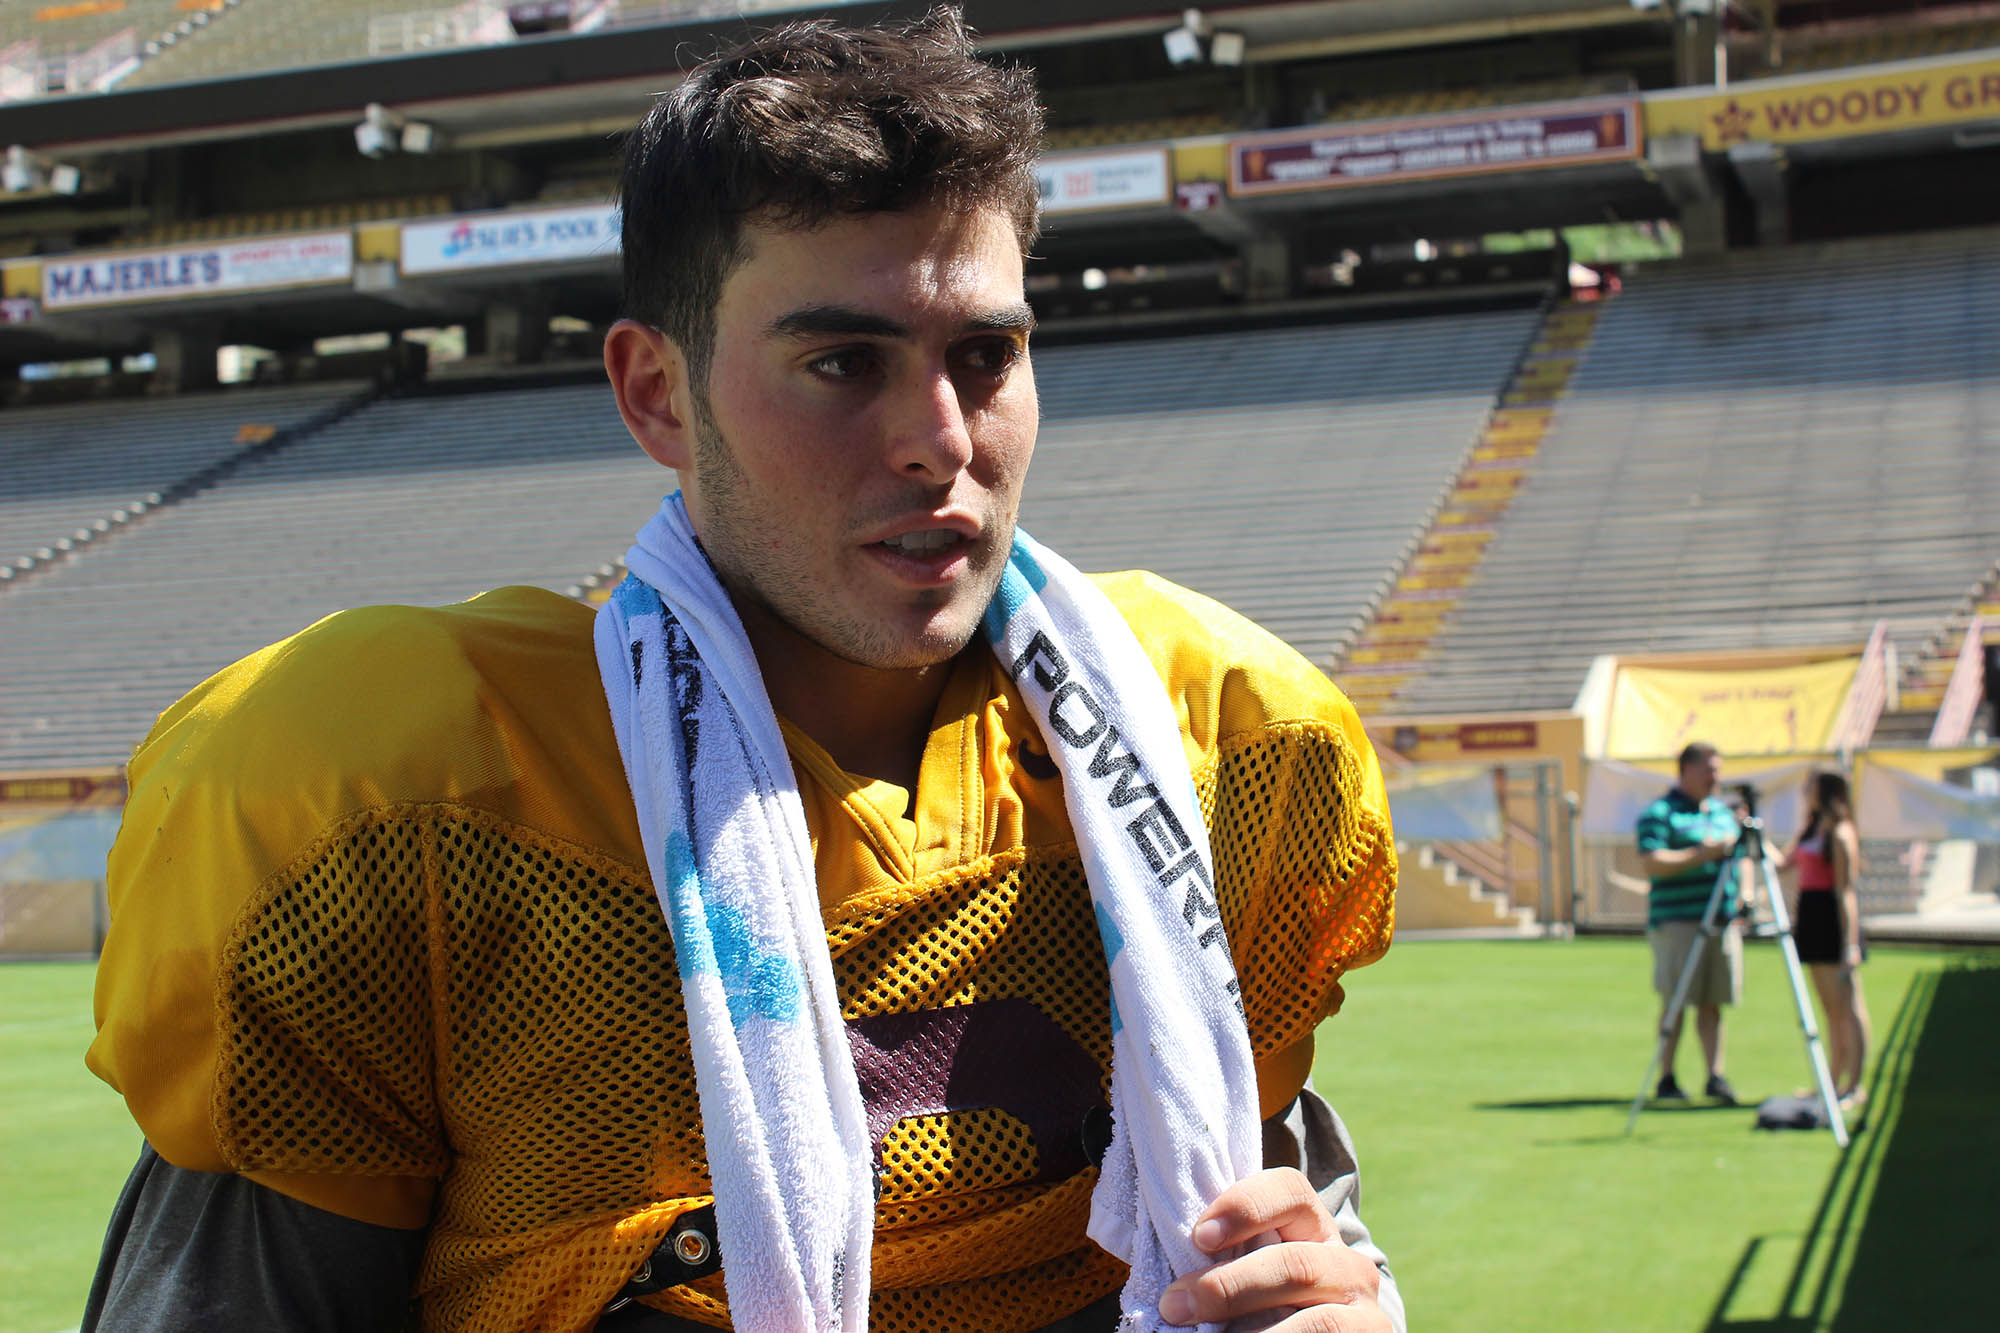 Backup quarterback Mike Bercovici said he's ready to lead Arizona State in Thursday's home game against UCLA.